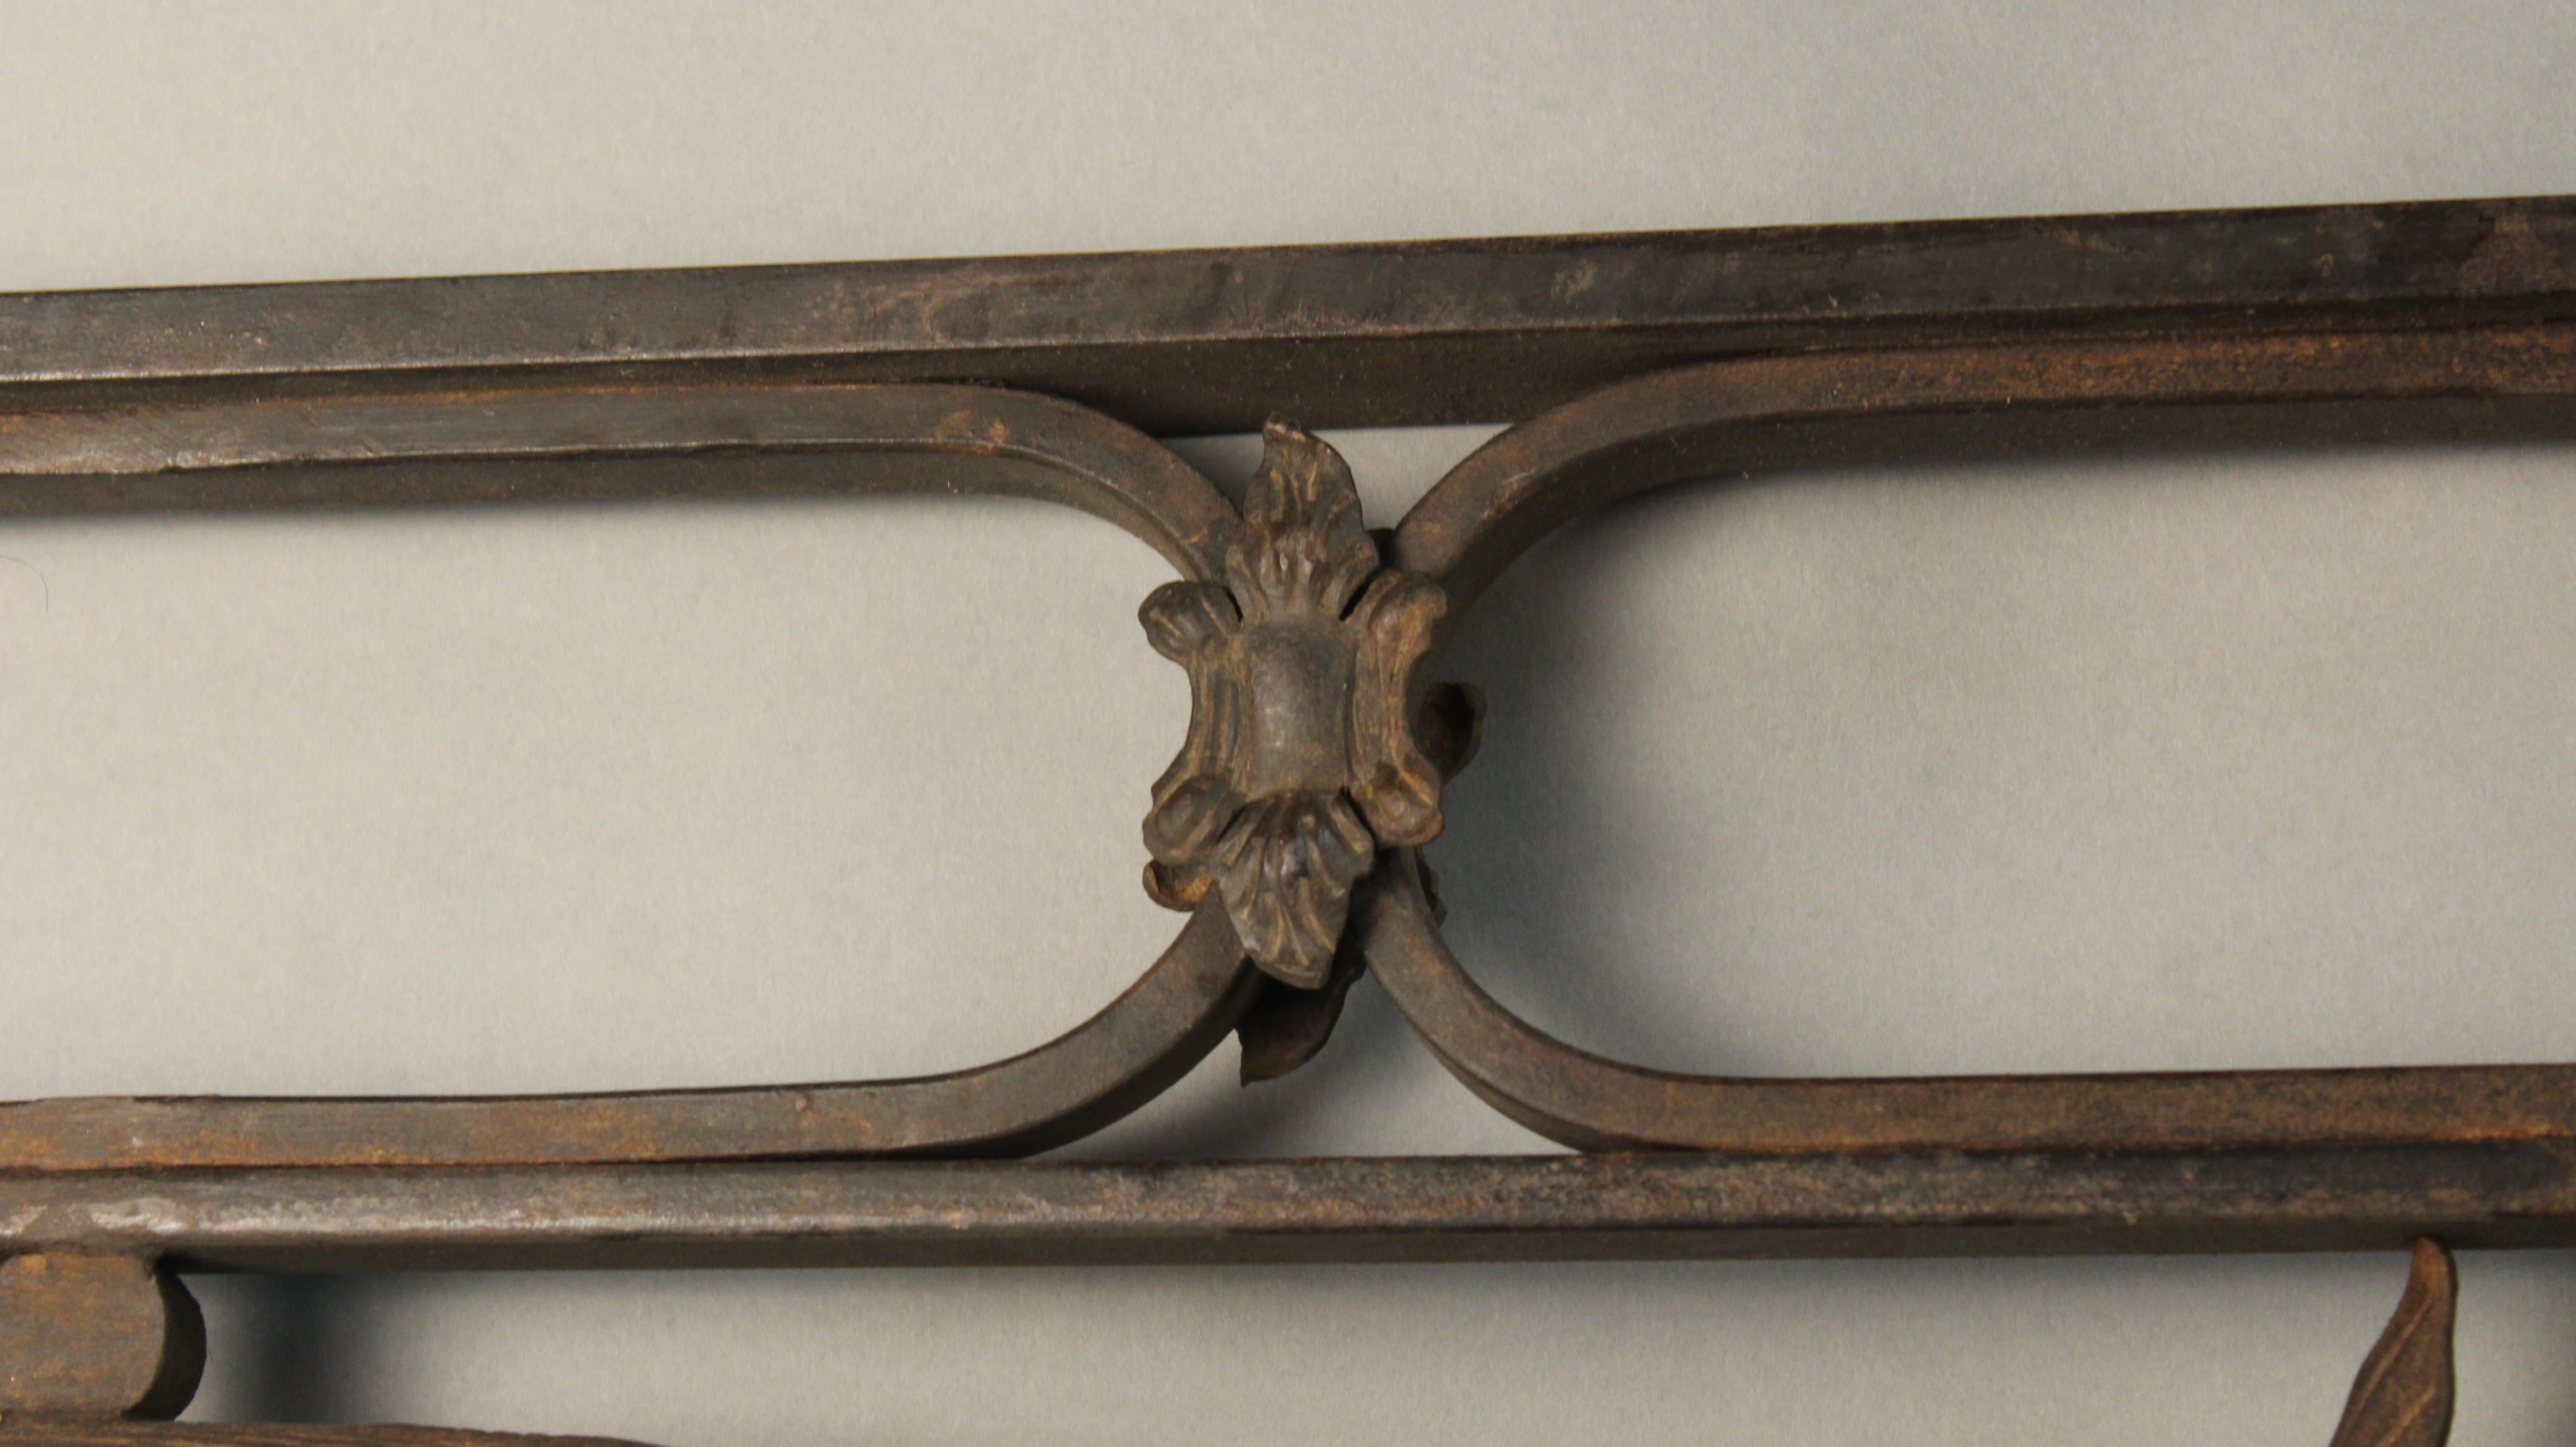 Incredible 1920s Wrought Iron Architectural Element In Good Condition For Sale In Pasadena, CA